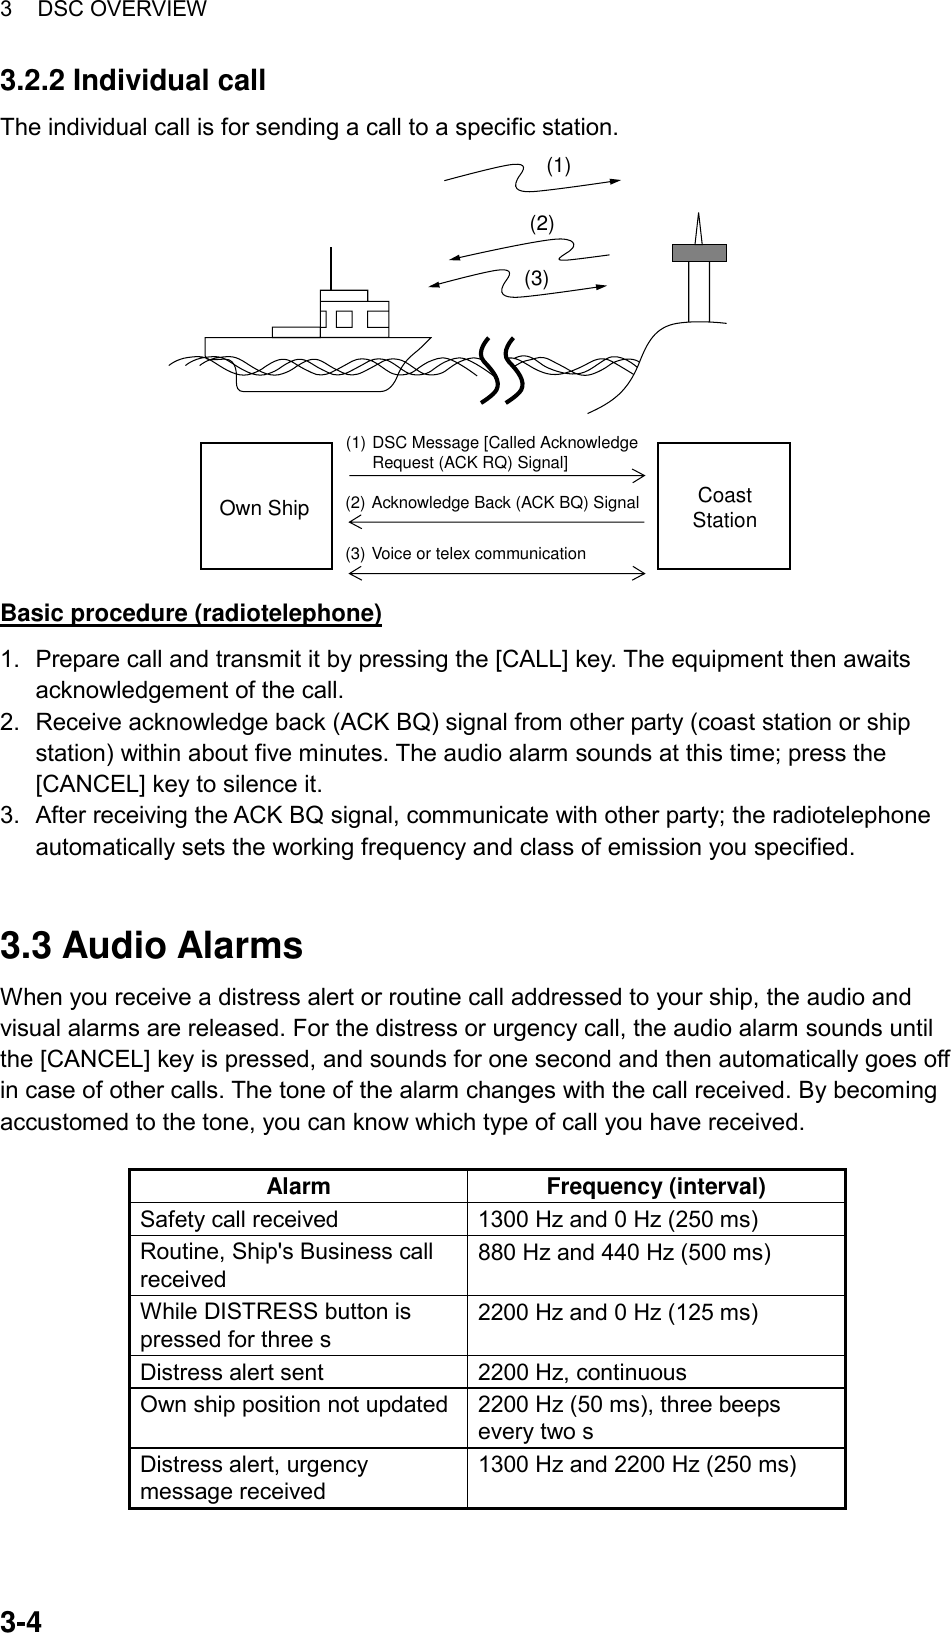 3 DSC OVERVIEW  3-43.2.2 Individual call The individual call is for sending a call to a specific station.   CoastStationOwn Ship(1) DSC Message [Called AcknowledgeRequest (ACK RQ) Signal](2) Acknowledge Back (ACK BQ) Signal(3) Voice or telex communication(1)(2)(3) Basic procedure (radiotelephone) 1.  Prepare call and transmit it by pressing the [CALL] key. The equipment then awaits acknowledgement of the call. 2.  Receive acknowledge back (ACK BQ) signal from other party (coast station or ship station) within about five minutes. The audio alarm sounds at this time; press the [CANCEL] key to silence it. 3.  After receiving the ACK BQ signal, communicate with other party; the radiotelephone automatically sets the working frequency and class of emission you specified.   3.3 Audio Alarms When you receive a distress alert or routine call addressed to your ship, the audio and visual alarms are released. For the distress or urgency call, the audio alarm sounds until the [CANCEL] key is pressed, and sounds for one second and then automatically goes off in case of other calls. The tone of the alarm changes with the call received. By becoming accustomed to the tone, you can know which type of call you have received.    Alarm Frequency (interval) Safety call received  1300 Hz and 0 Hz (250 ms) Routine, Ship&apos;s Business call received 880 Hz and 440 Hz (500 ms) While DISTRESS button is pressed for three s 2200 Hz and 0 Hz (125 ms) Distress alert sent  2200 Hz, continuous Own ship position not updated  2200 Hz (50 ms), three beeps every two s Distress alert, urgency message received 1300 Hz and 2200 Hz (250 ms) 